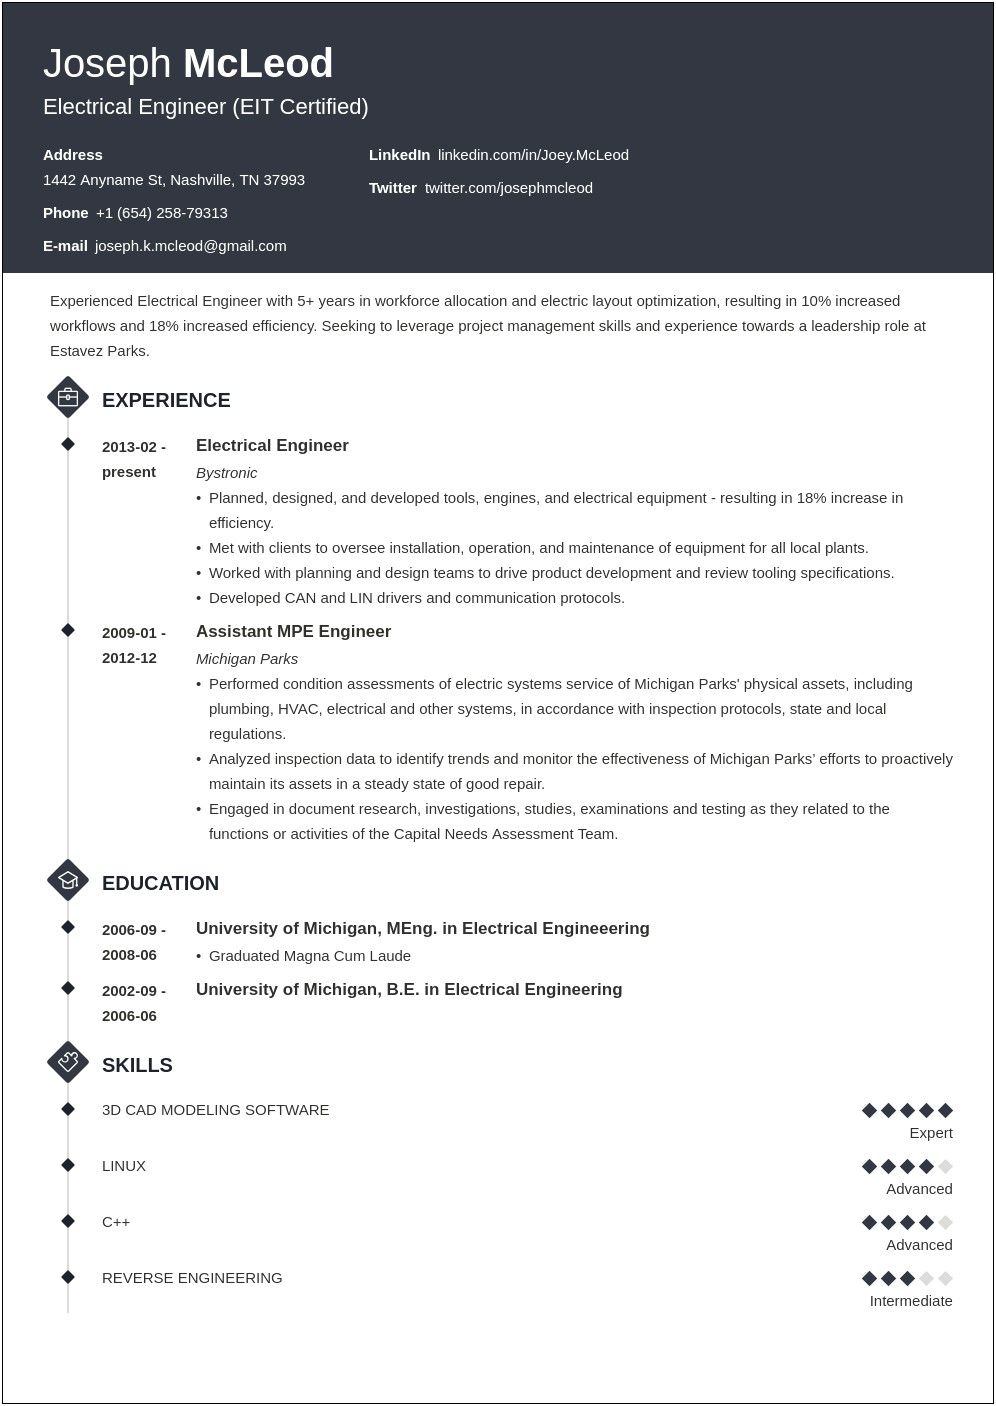 Sample Resume Of Computer And Electrical Engineering Students